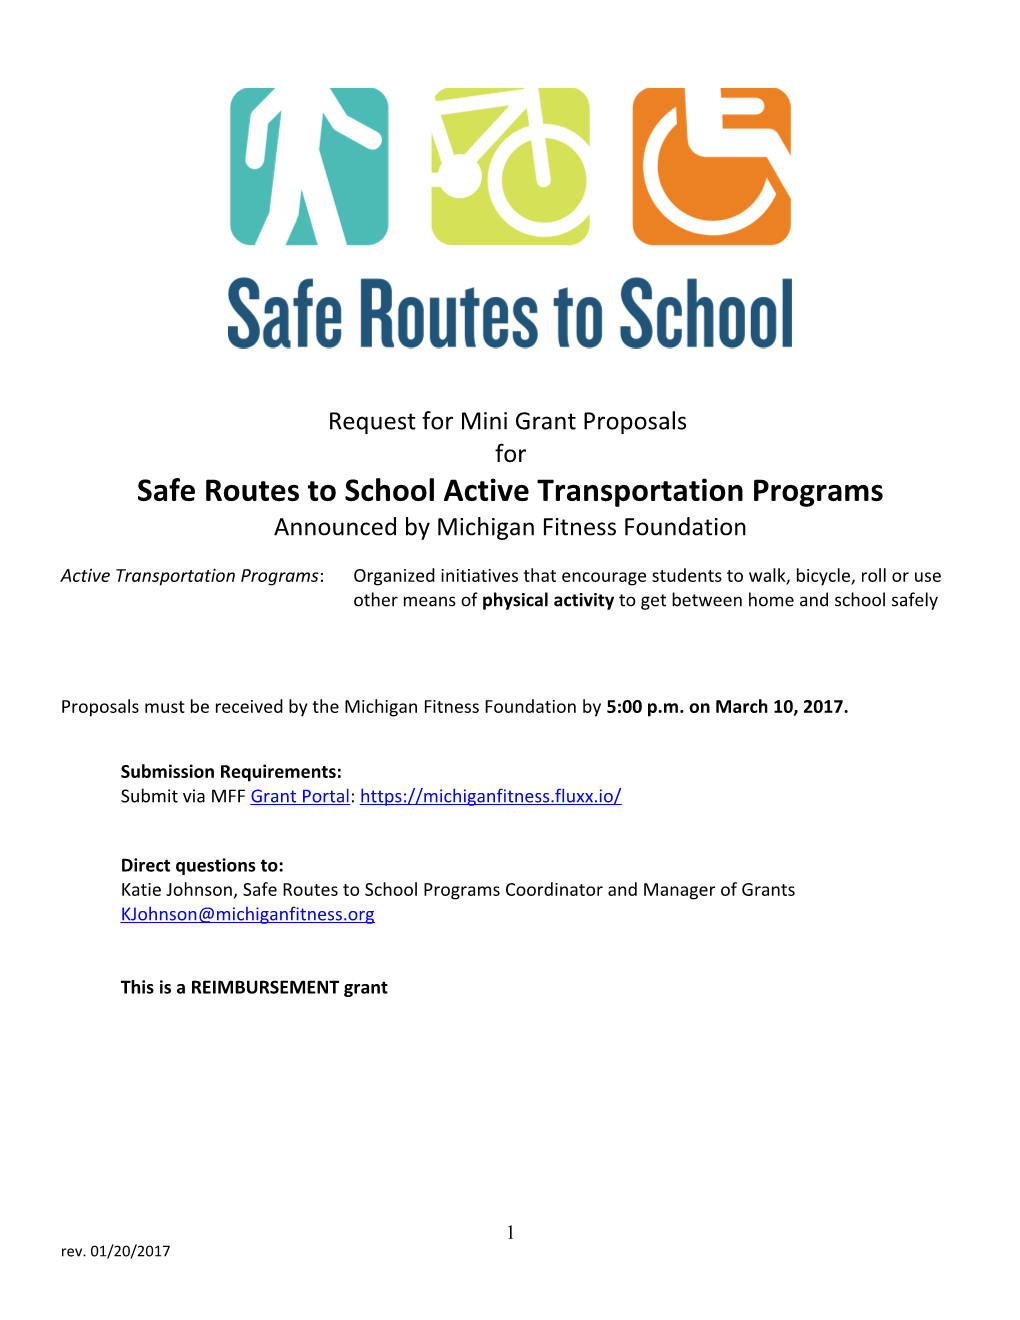 Safe Routes to School Active Transportation Programs